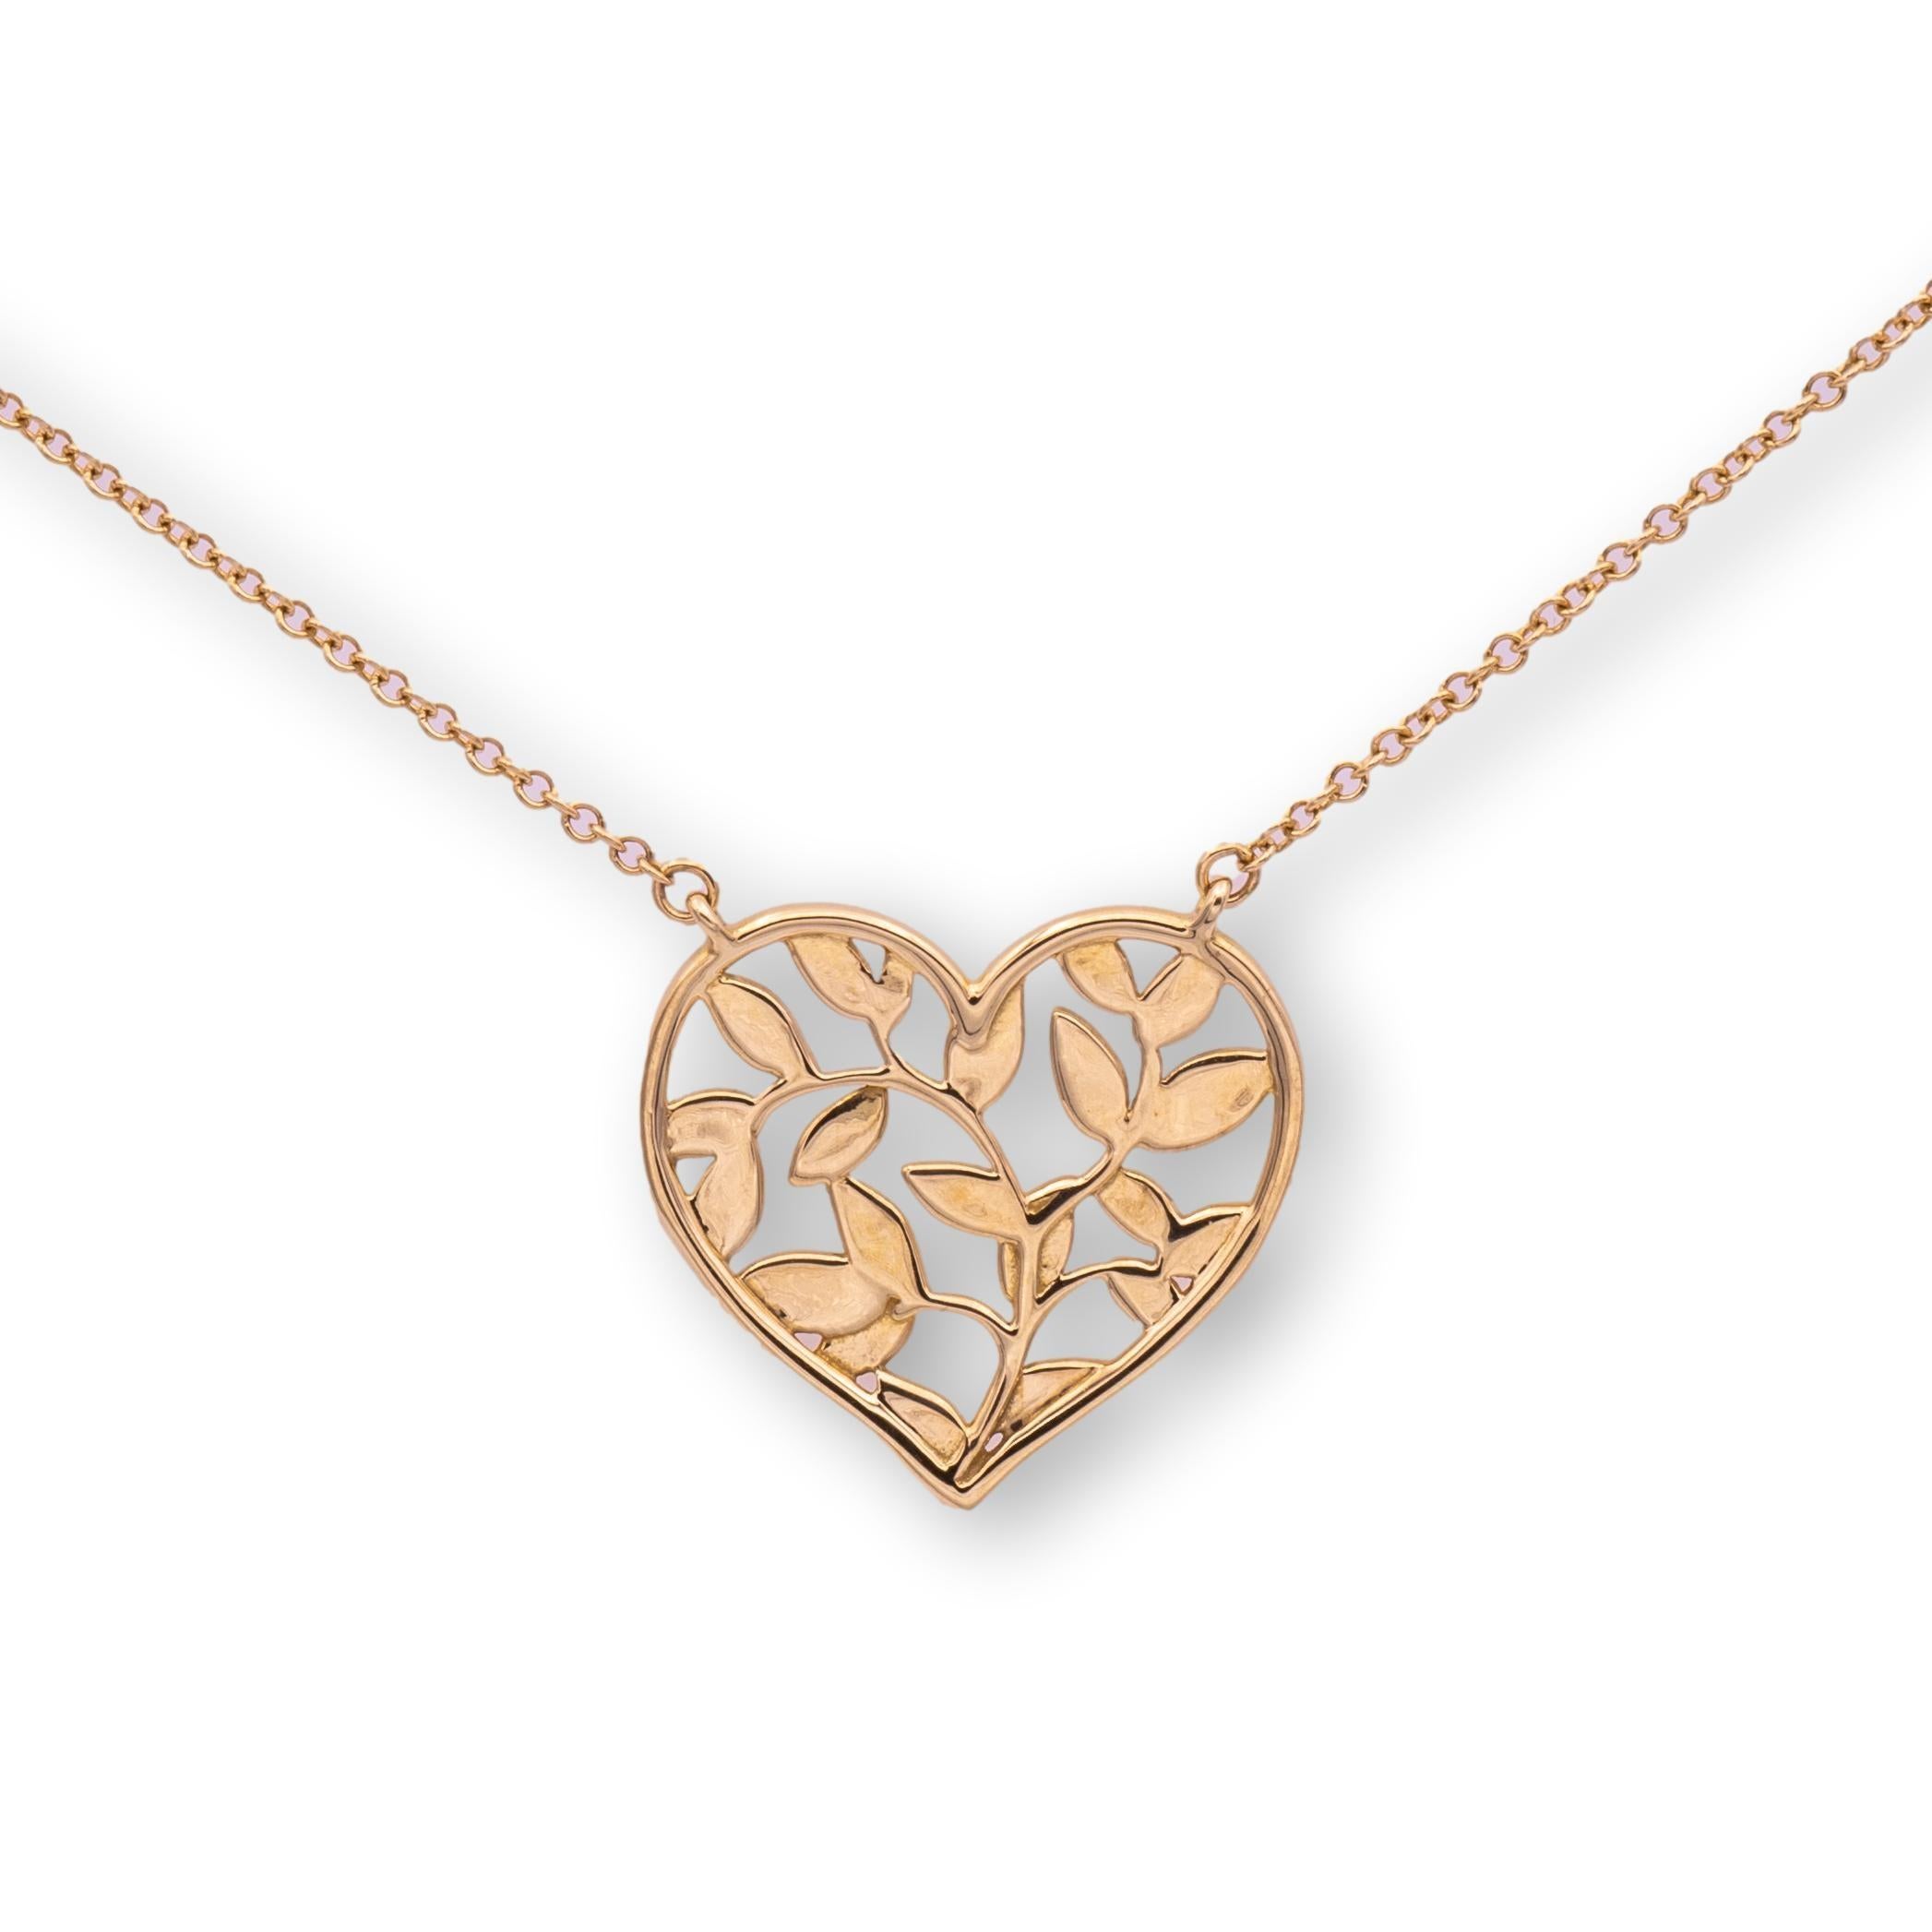 Tiffany and Co. Olive leaf heart pendant necklace designed by Paloma Picasso finely crafted in 18 karat yellow gold hanging off an 18